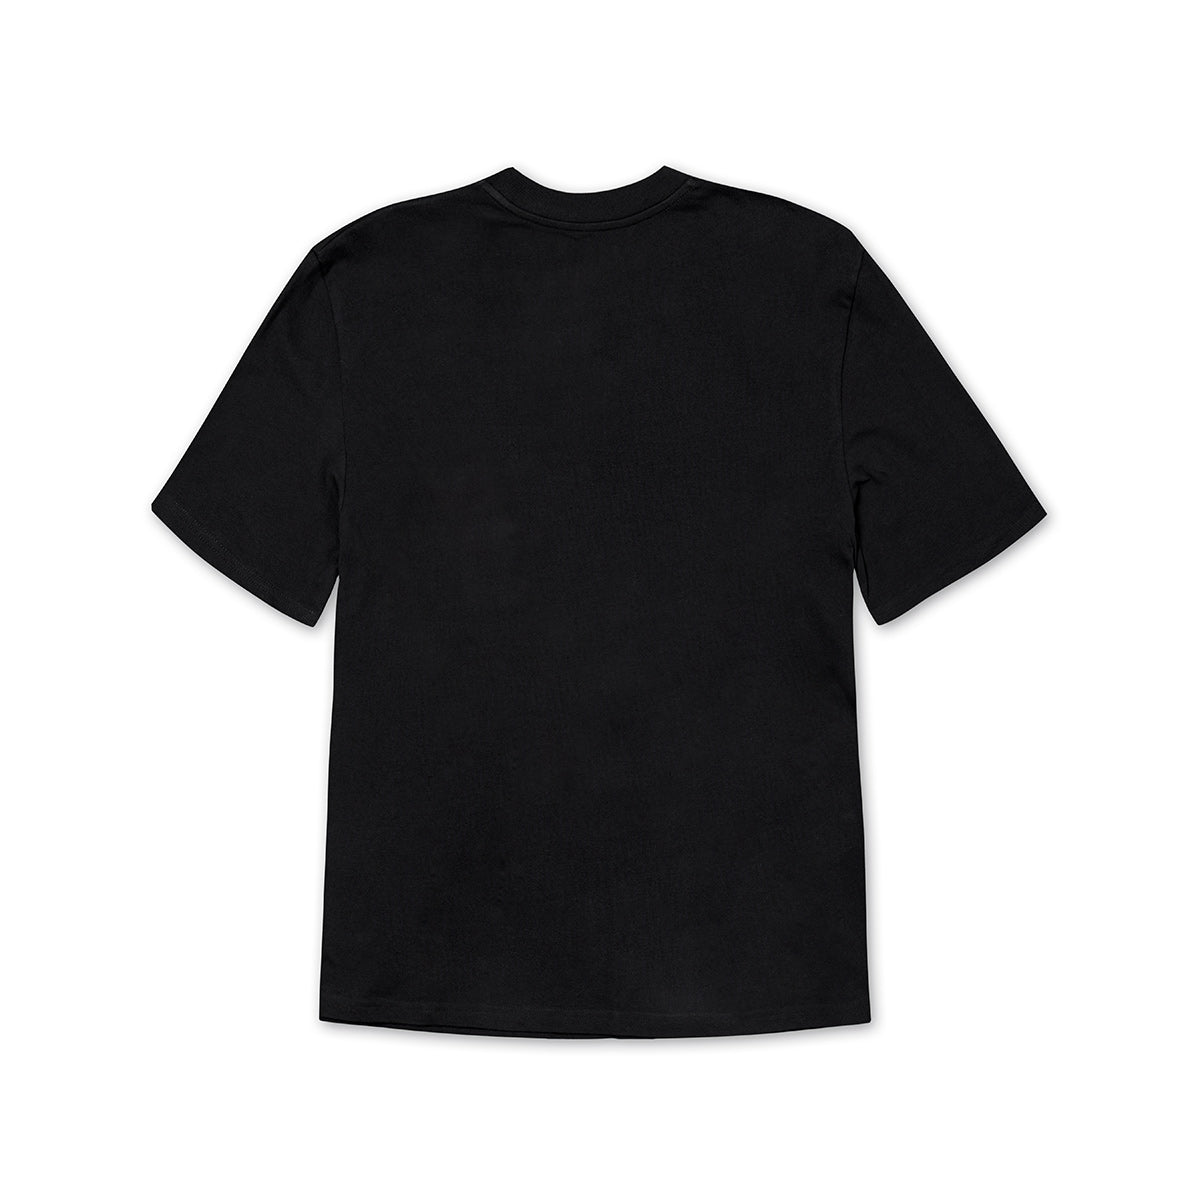 KROM PLAY LIFE COLLECTION MAIN BACK PICTURE T SHIRT BLACK